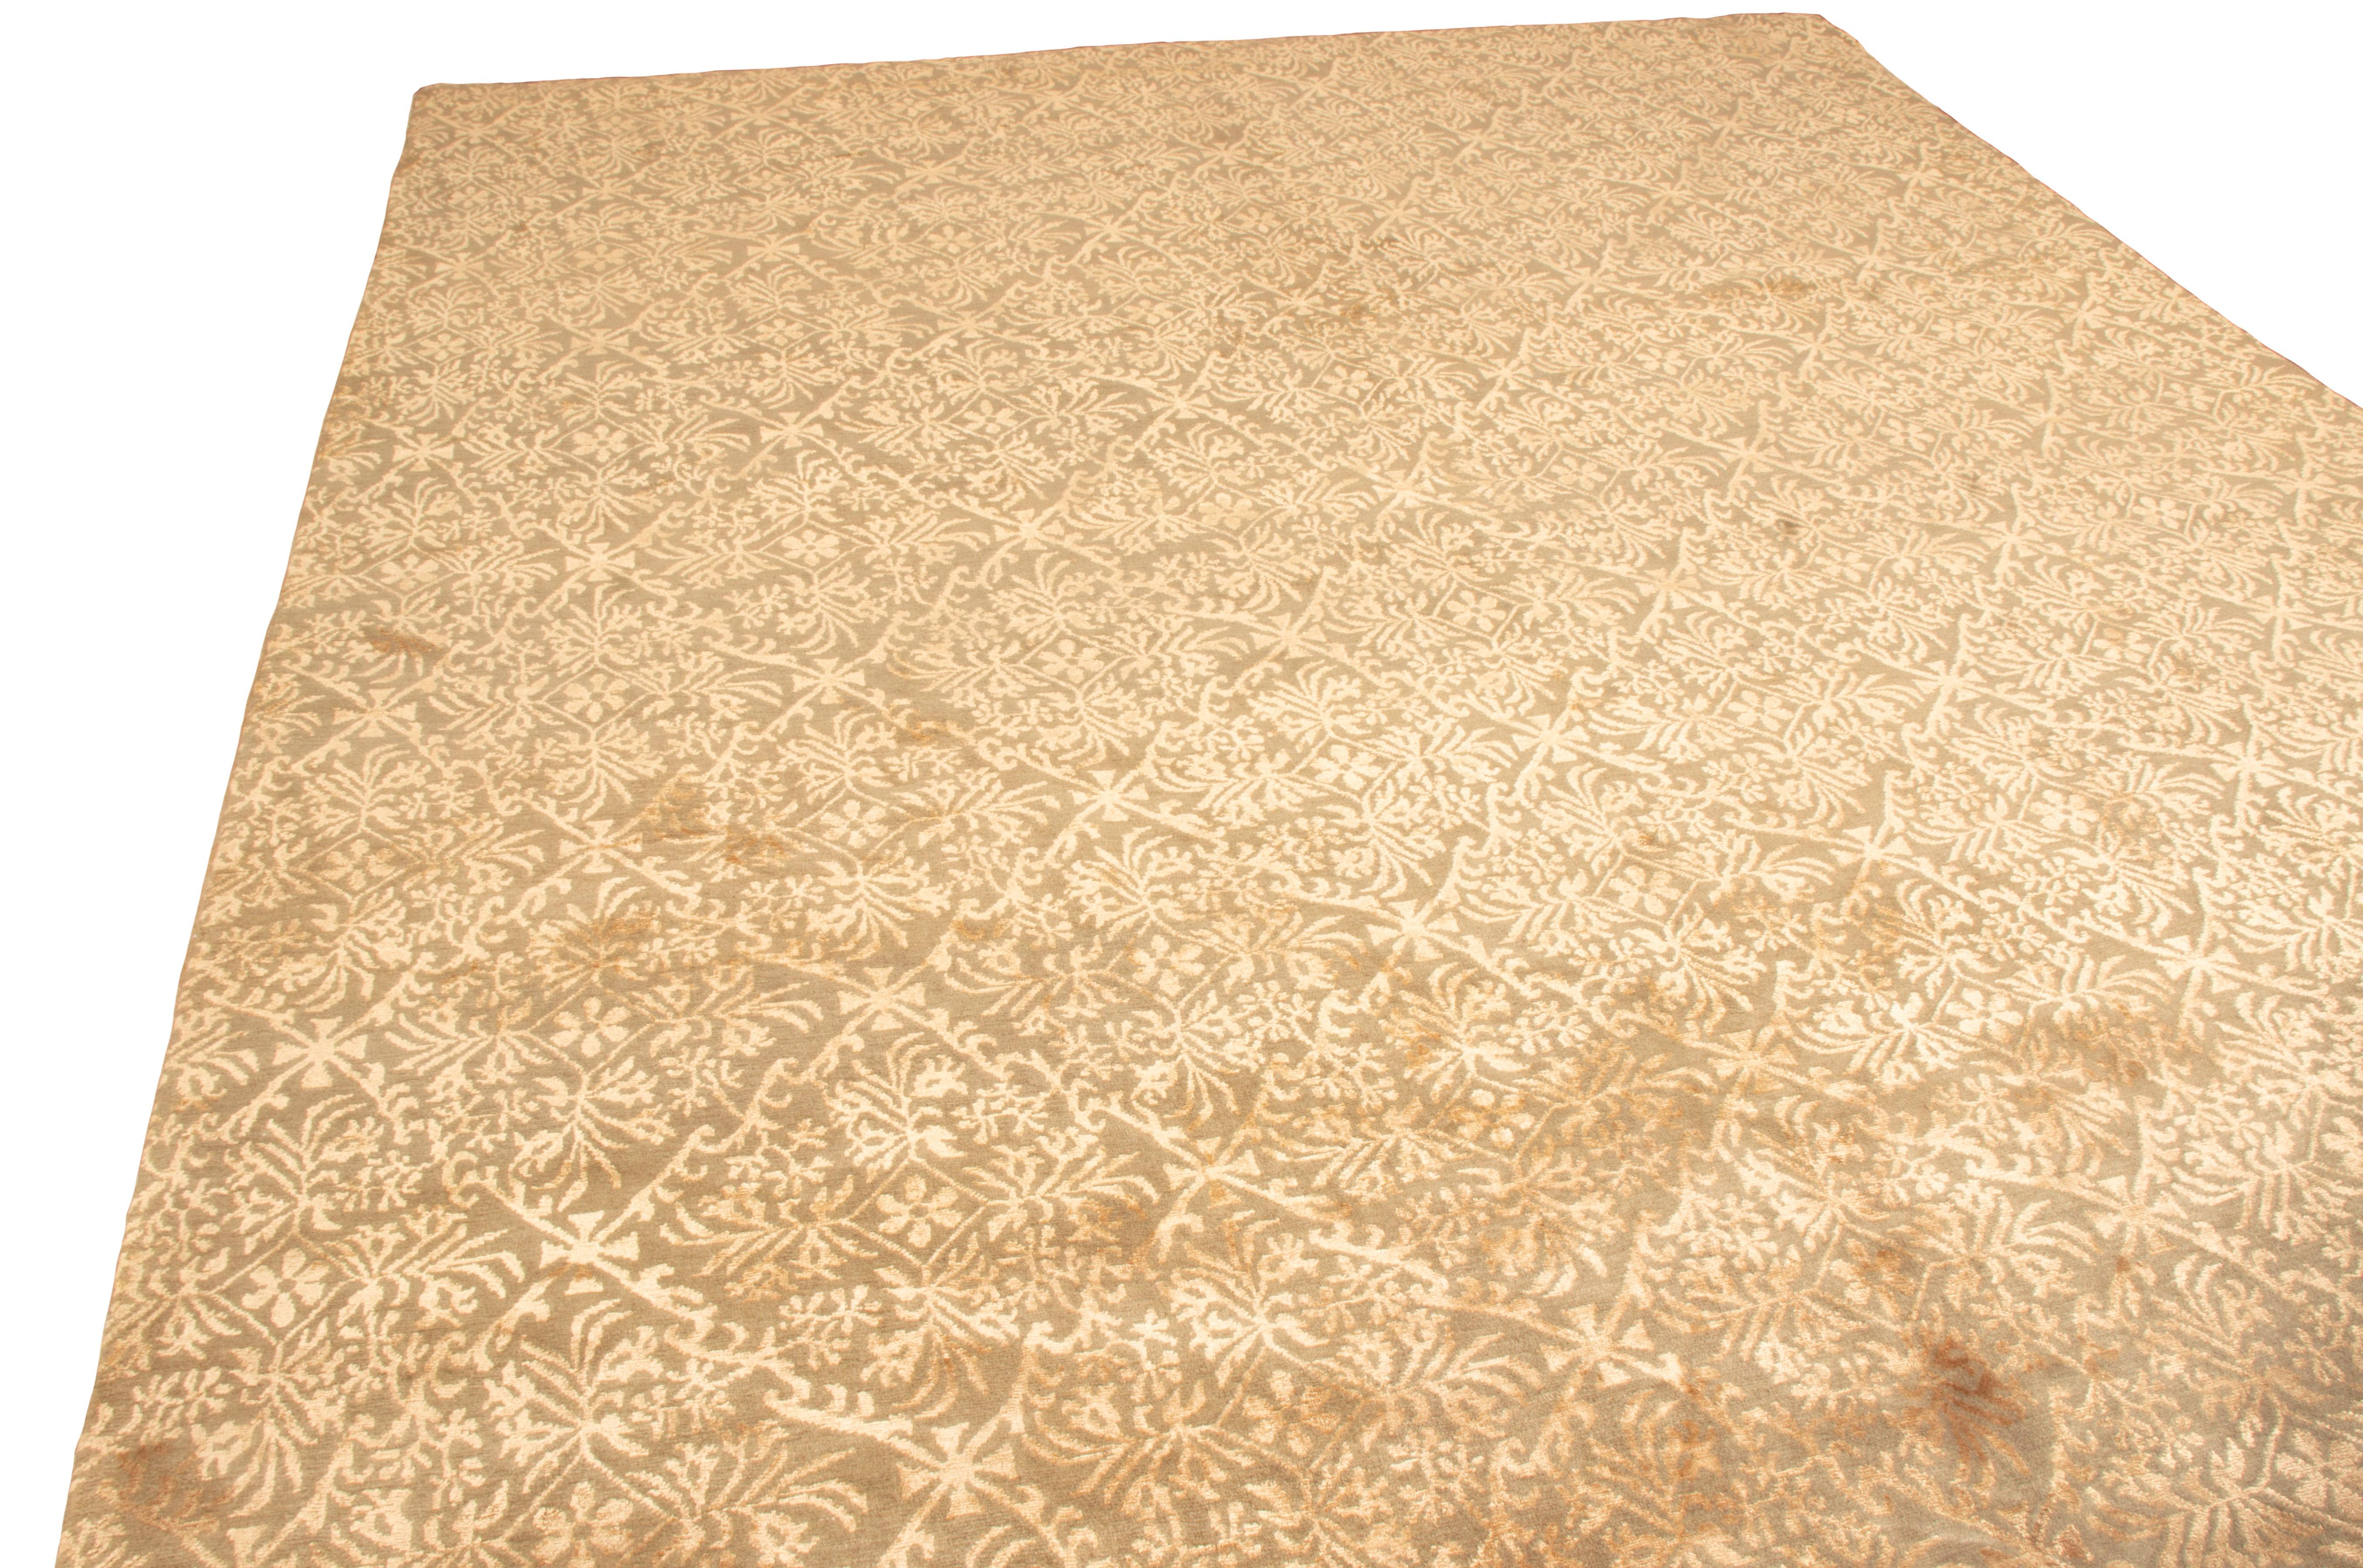 Nepalese Contemporary Cordoba Beige and Brown Wool and Silk Rug